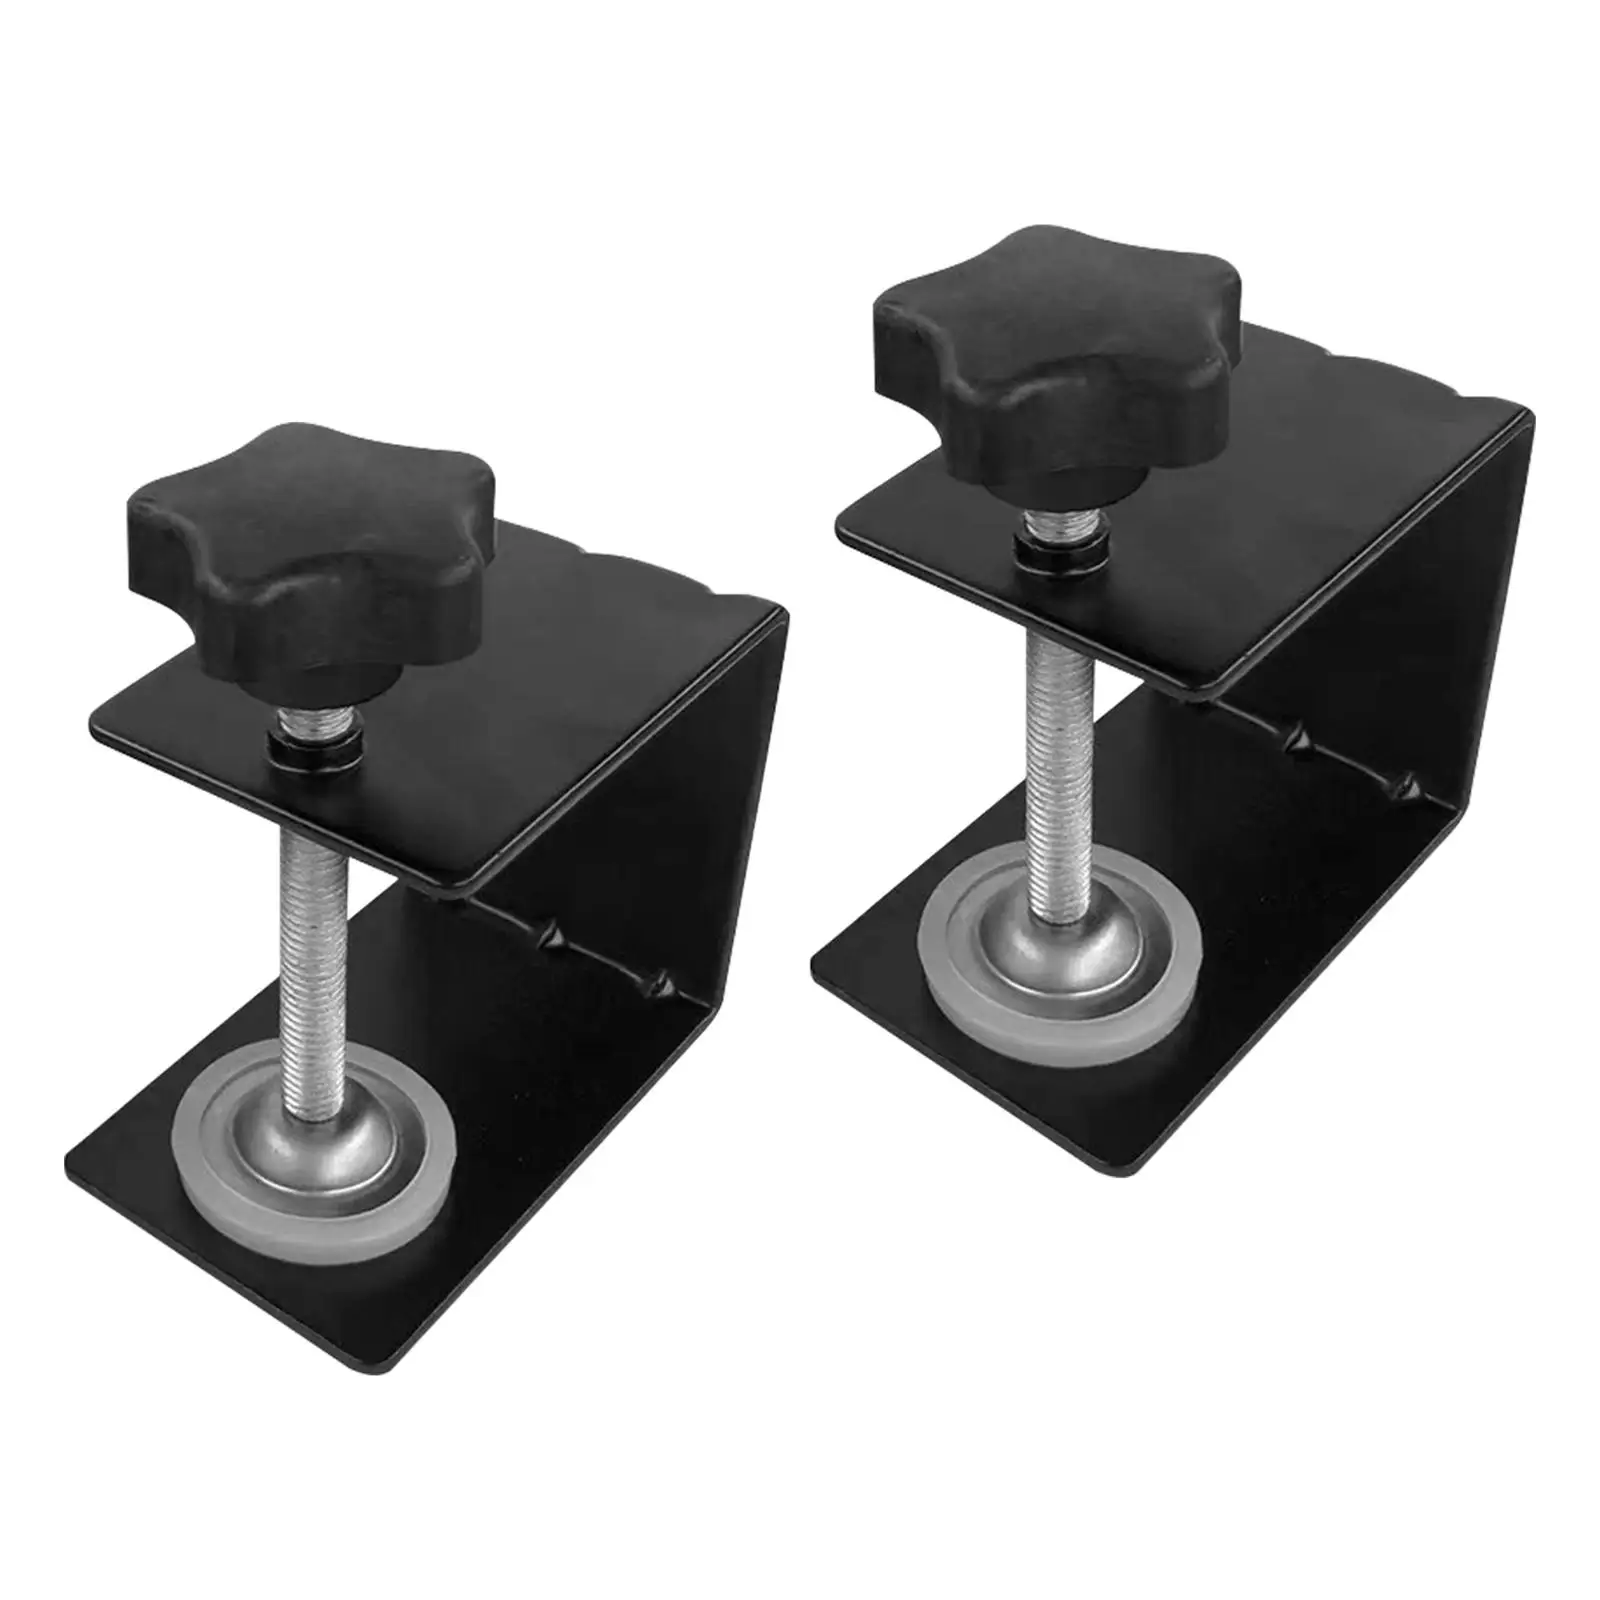 2x Portable Drawer Front Clamps Multifunction with Easy Adjustment Tool Hardware Mounting for Cabinet Woodworking Craft Repair